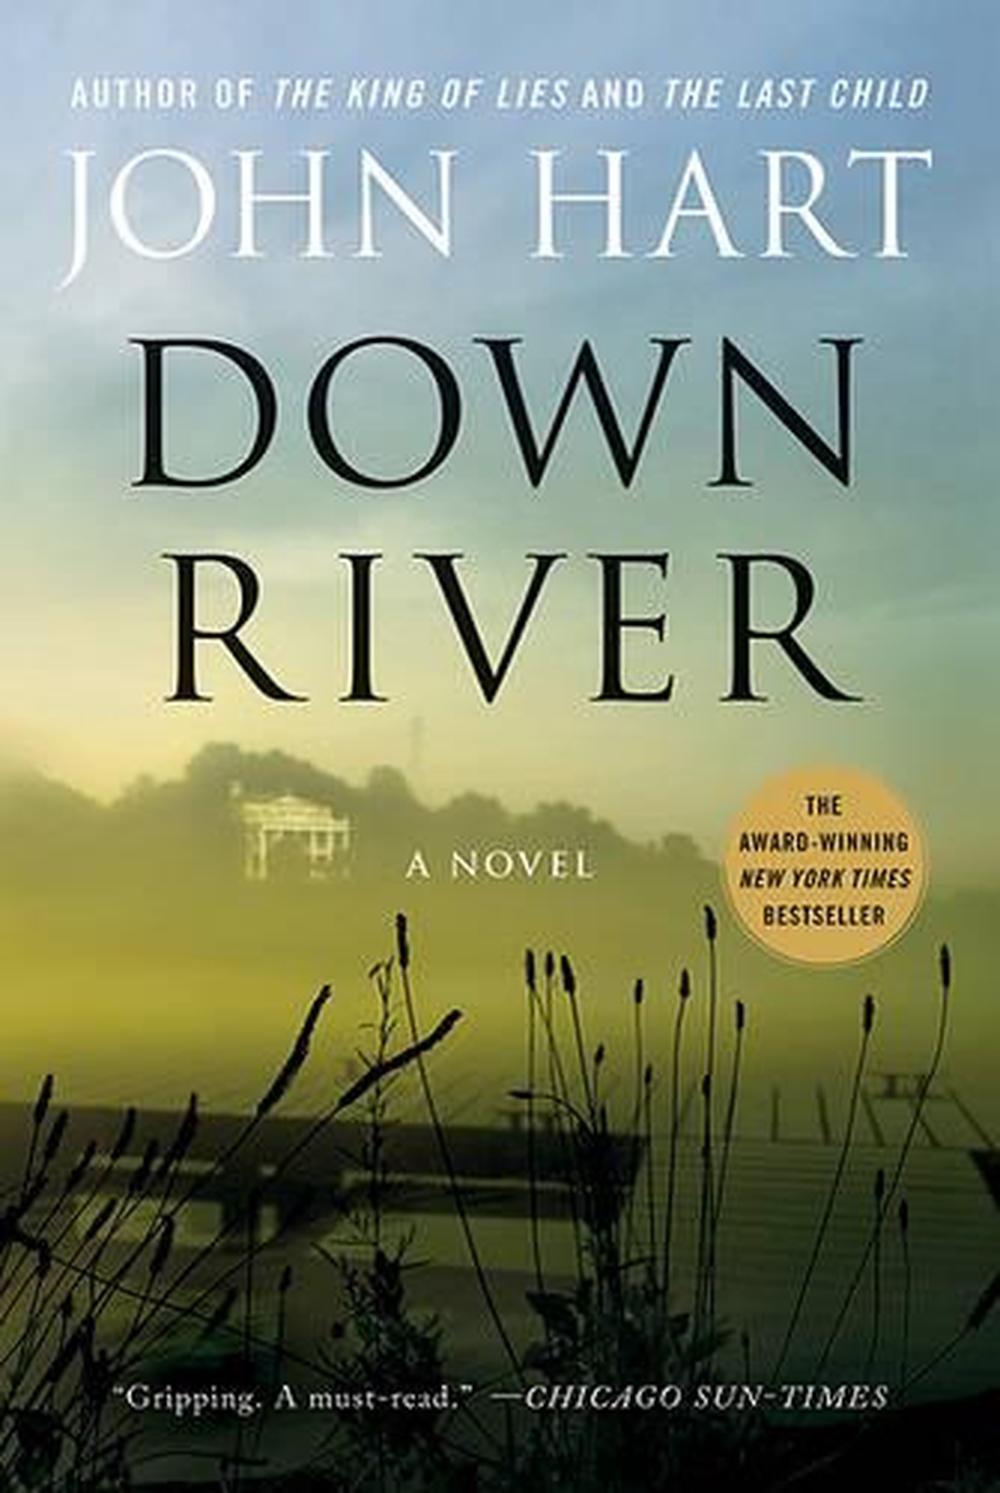 Down River by John Hart, Paperback, 9780312677381 Buy online at The Nile